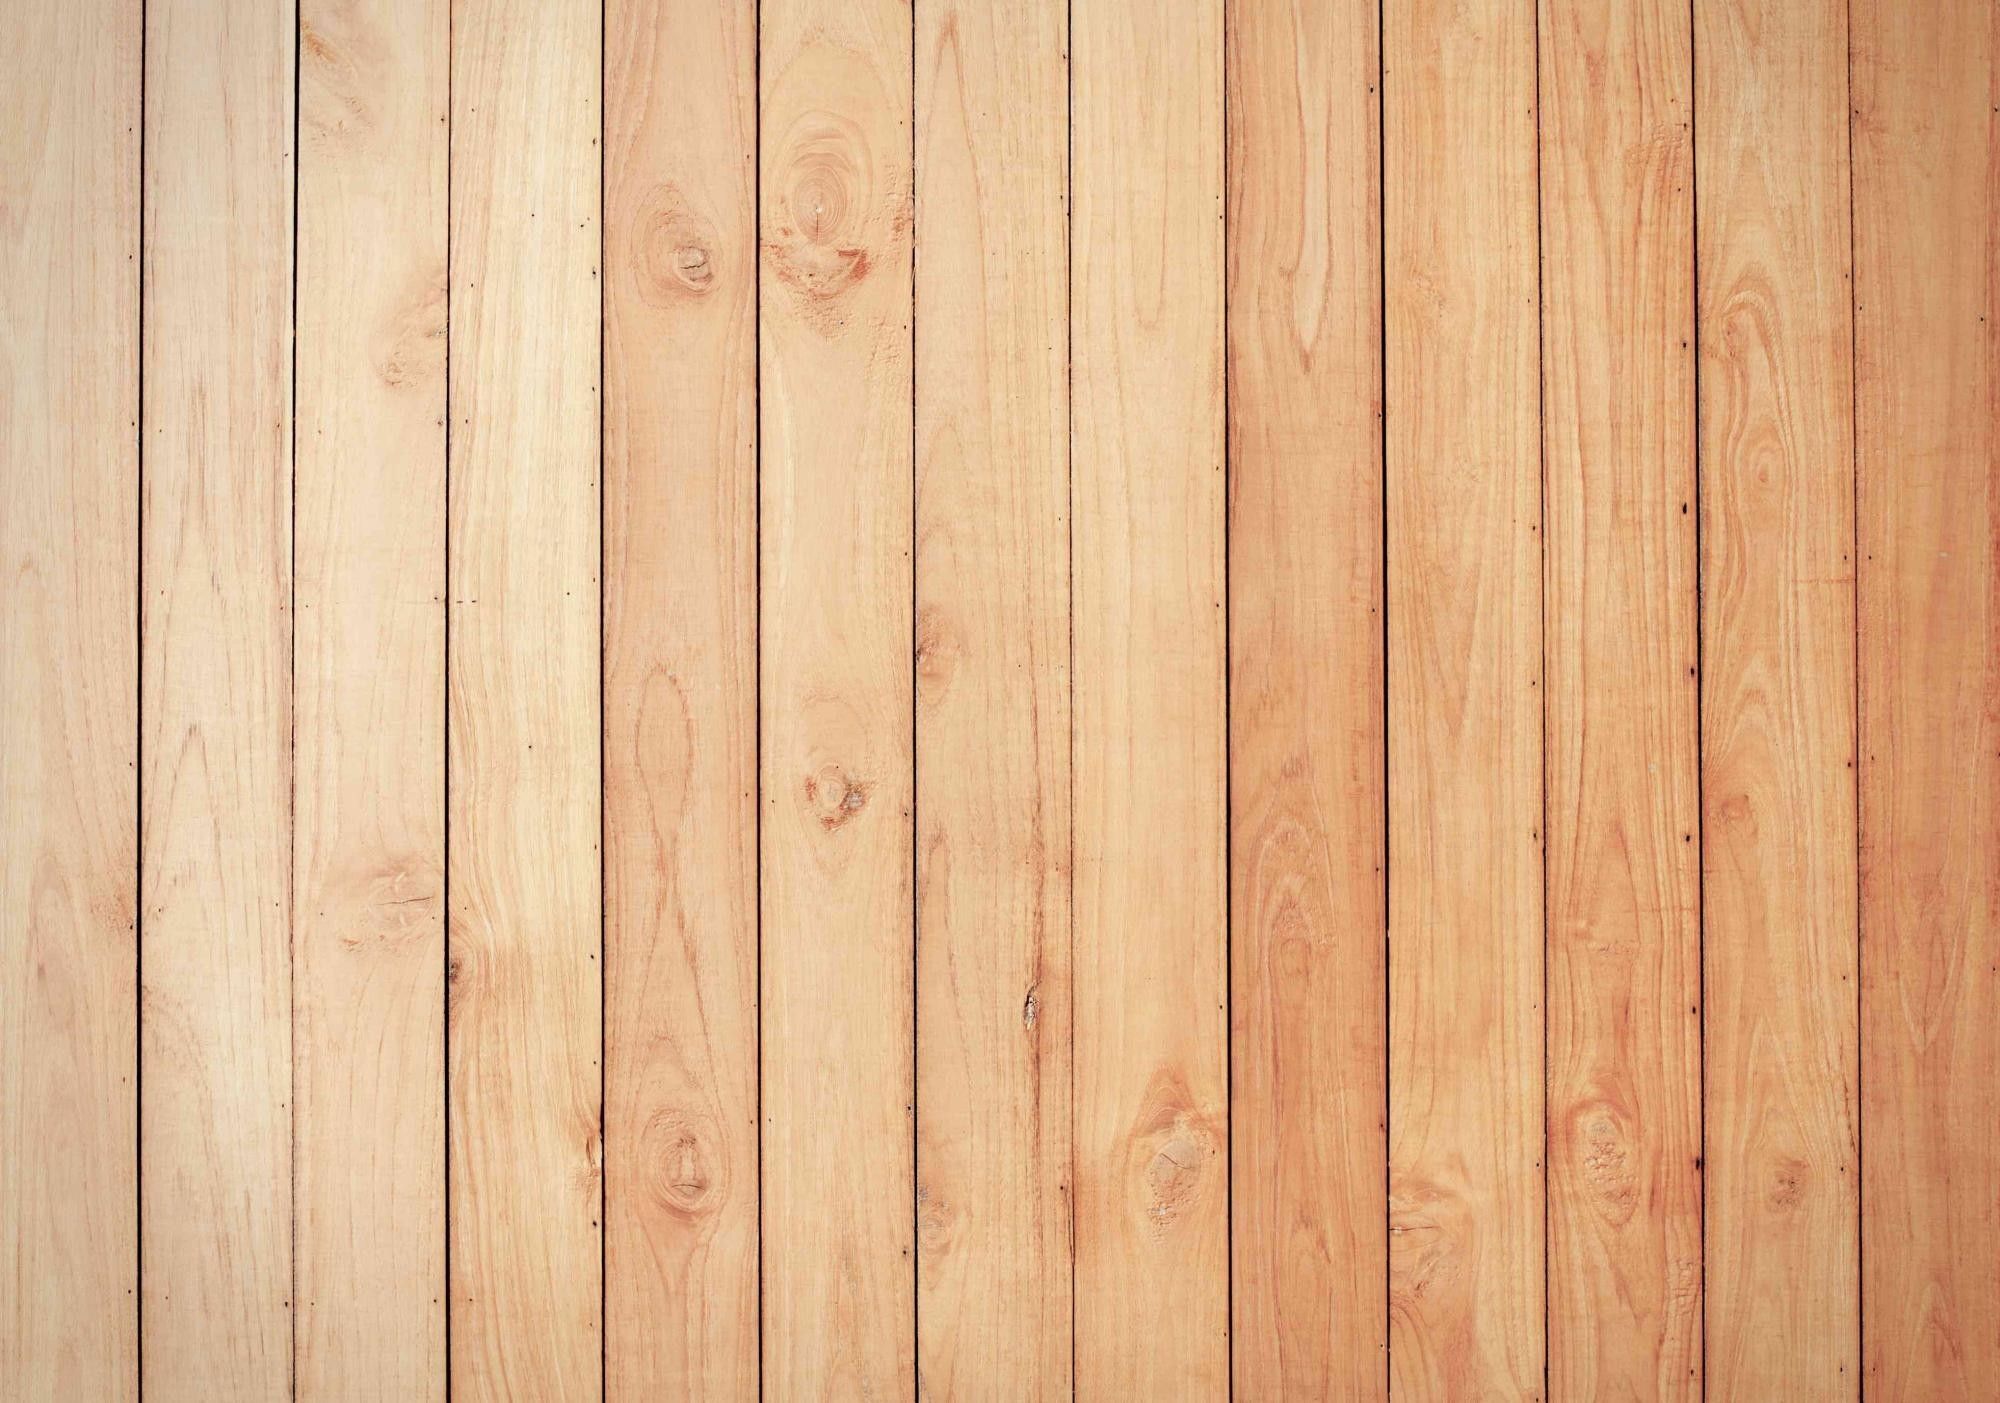 Wood Background Photos Download The BEST Free Wood Background Stock Photos   HD Images